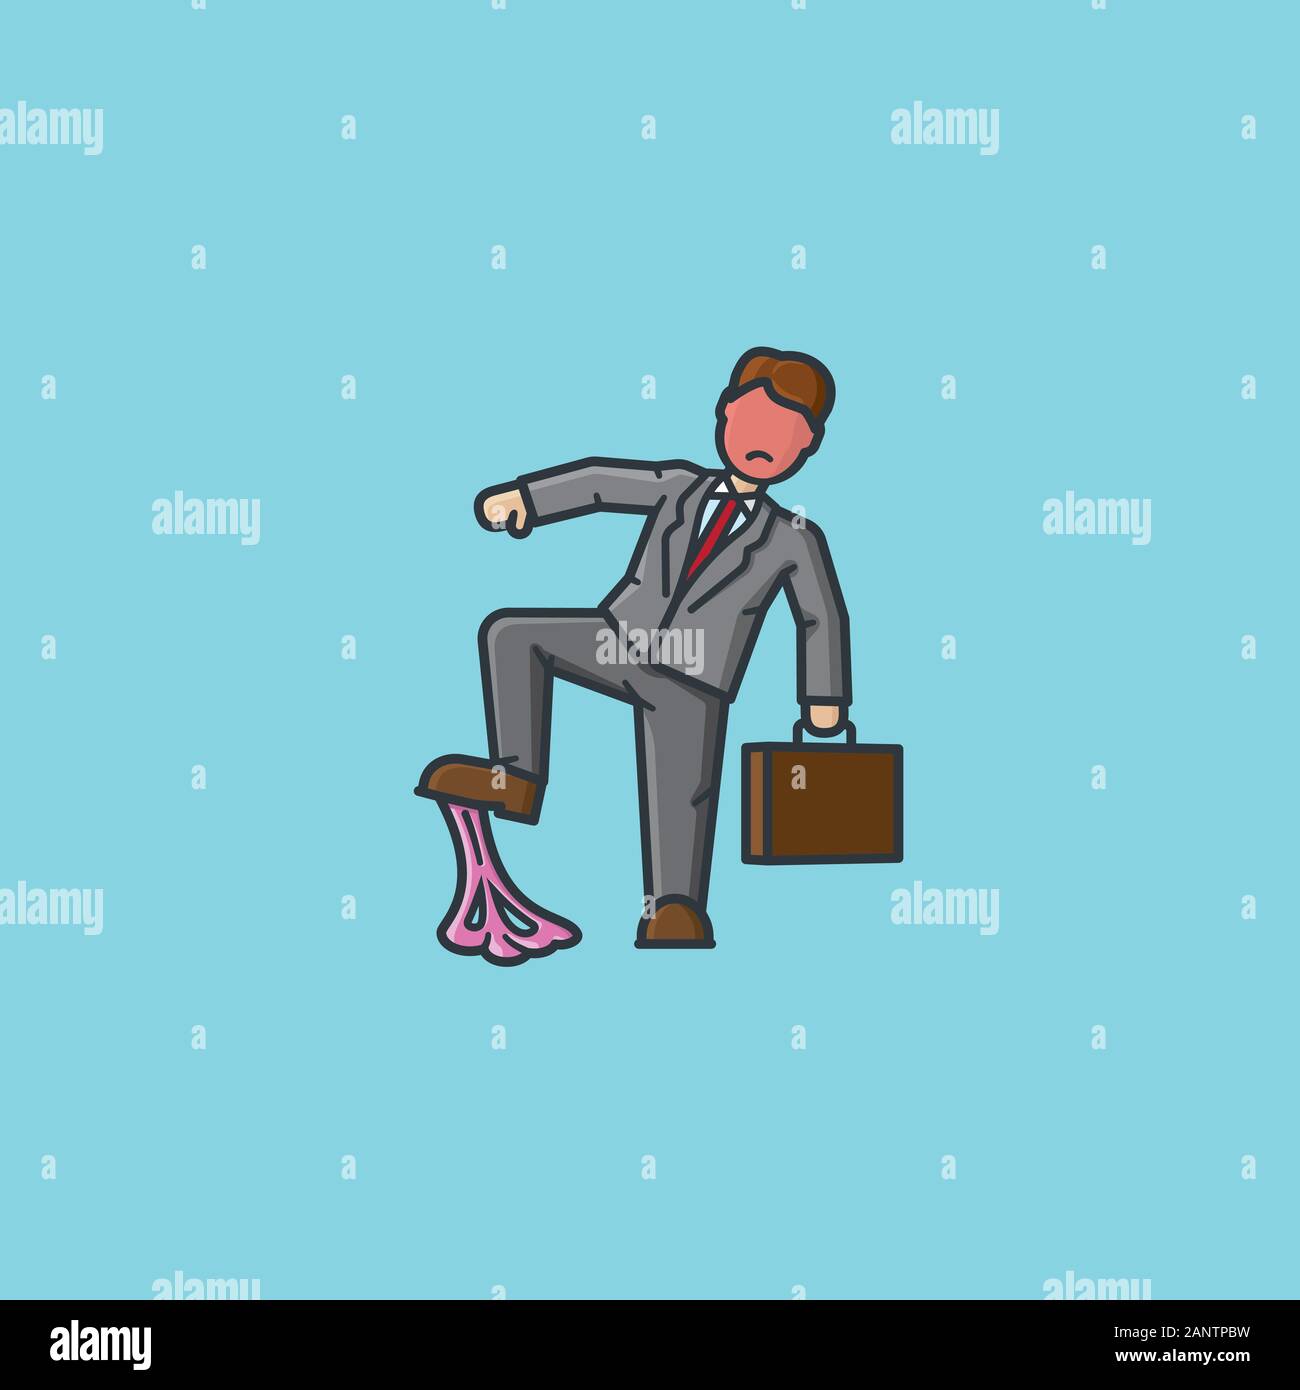 Businessman stepping in bubblegum vector illustration for Bubble Gum Day on February 7. Mishap, bad luck, annoyance color symbol. Stock Vector